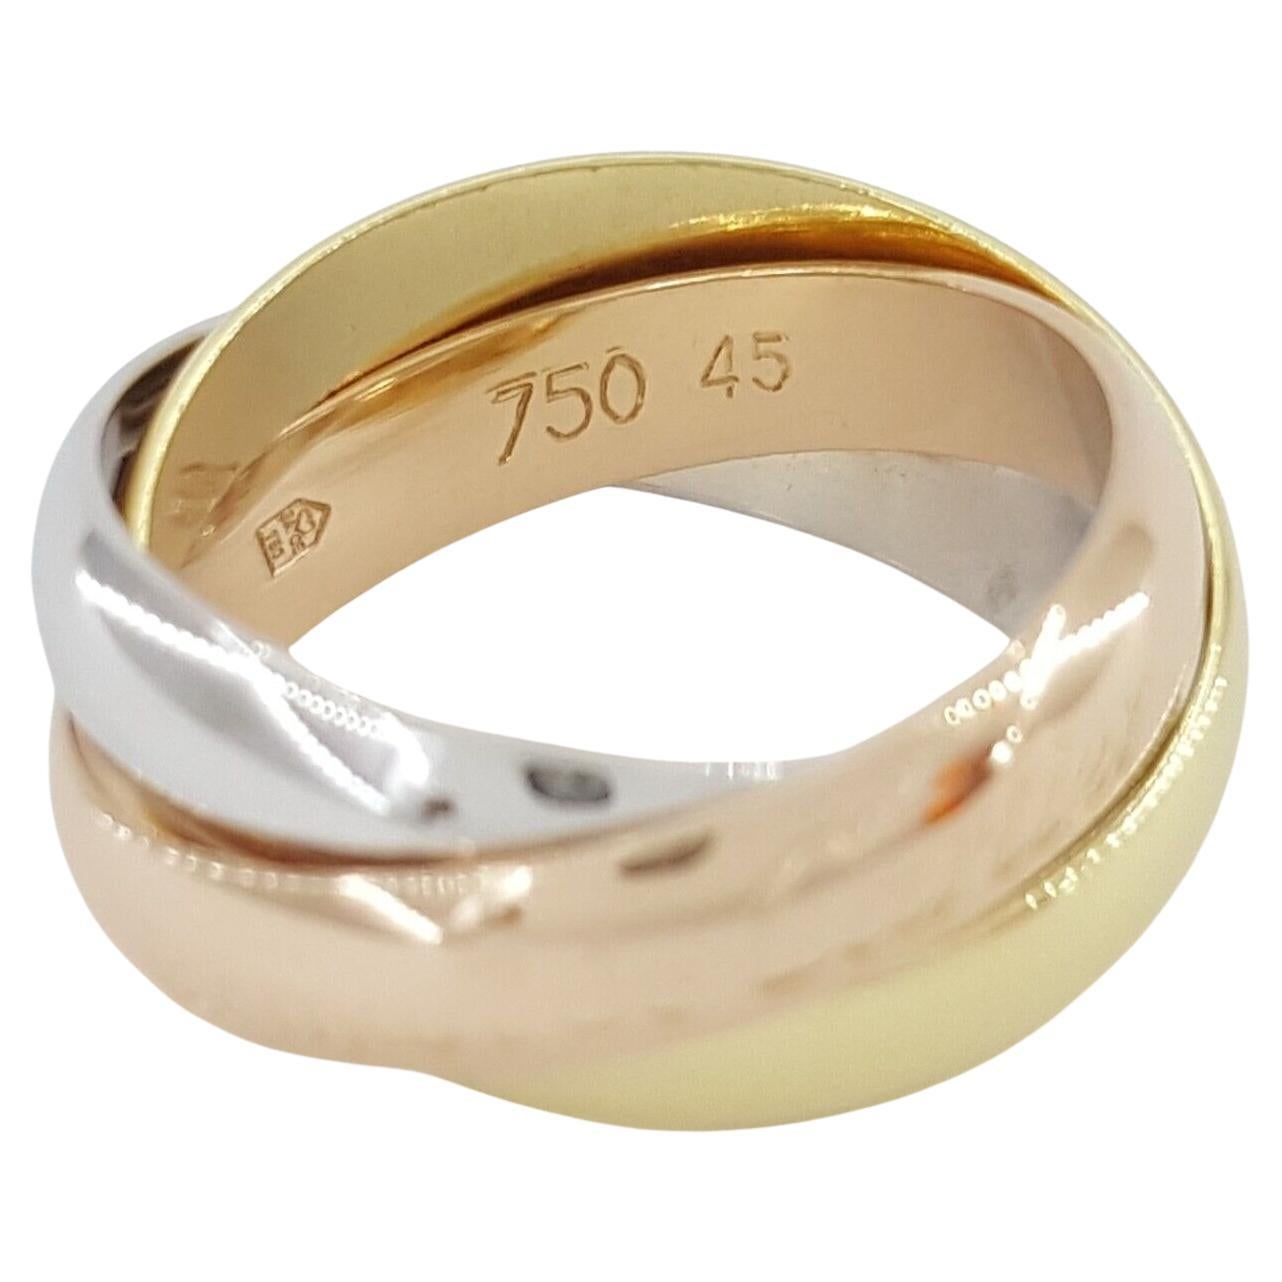  Cartier Trinity 18K Yellow, White & Rose Gold Ring 